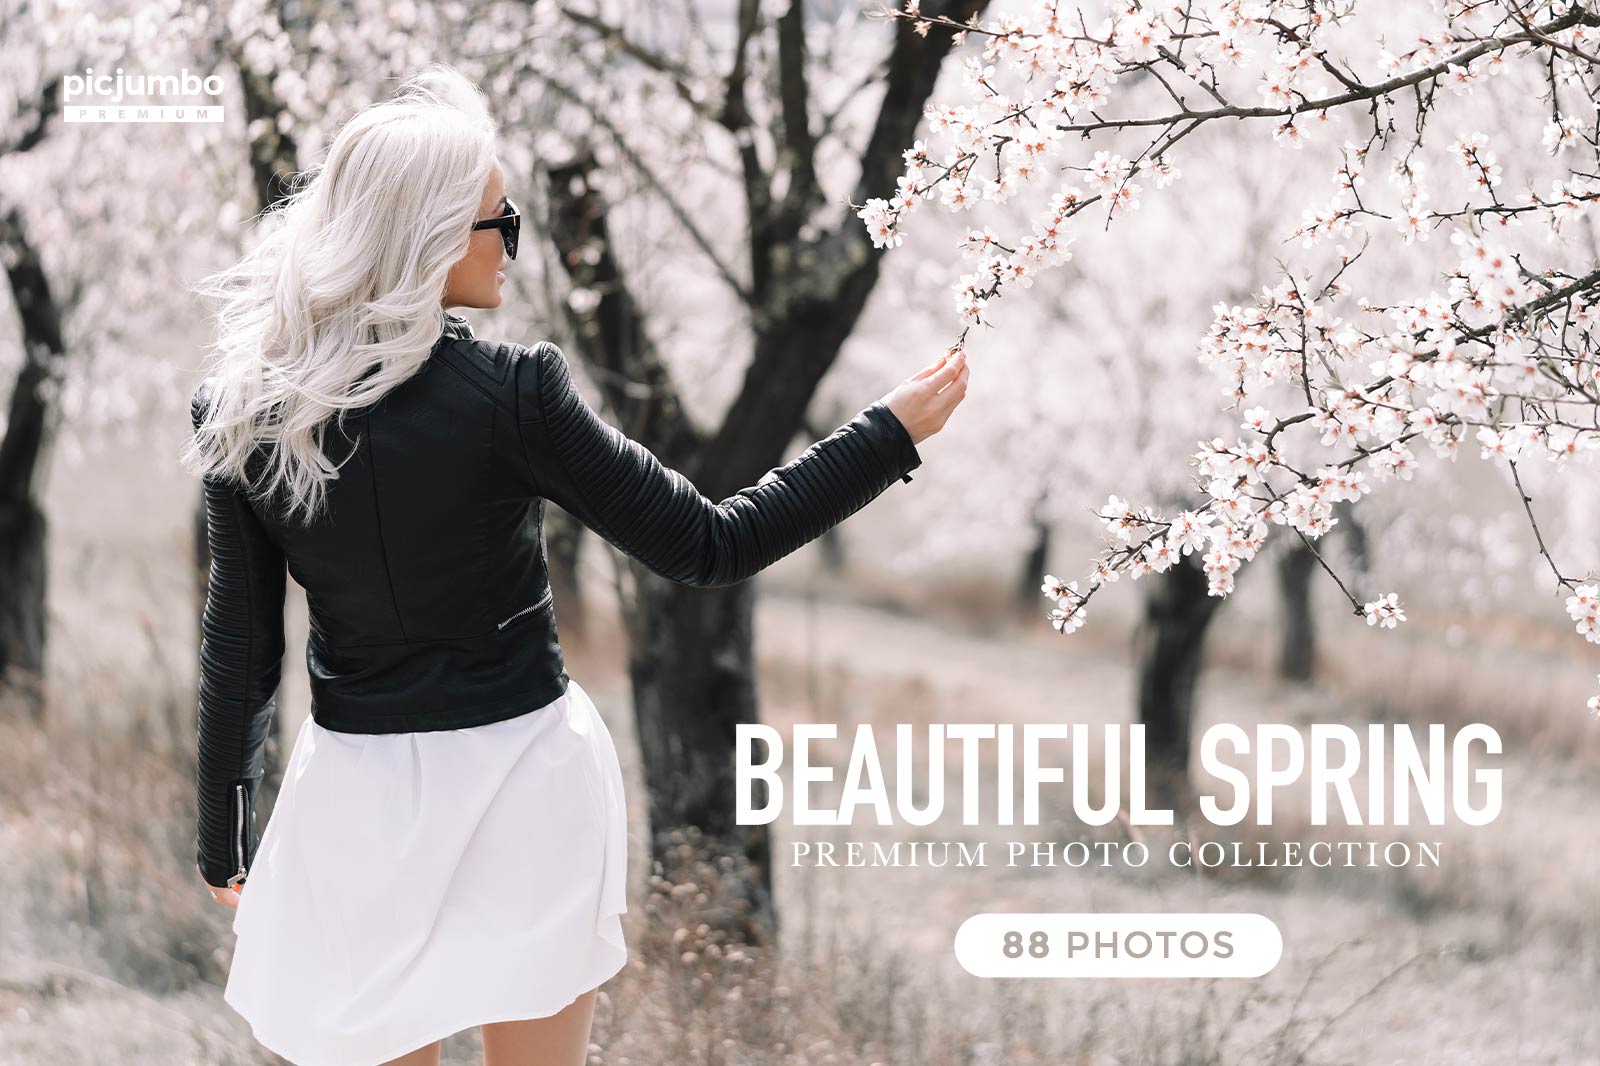 Download hi-res stock photos from our Beautiful Spring PREMIUM Collection!